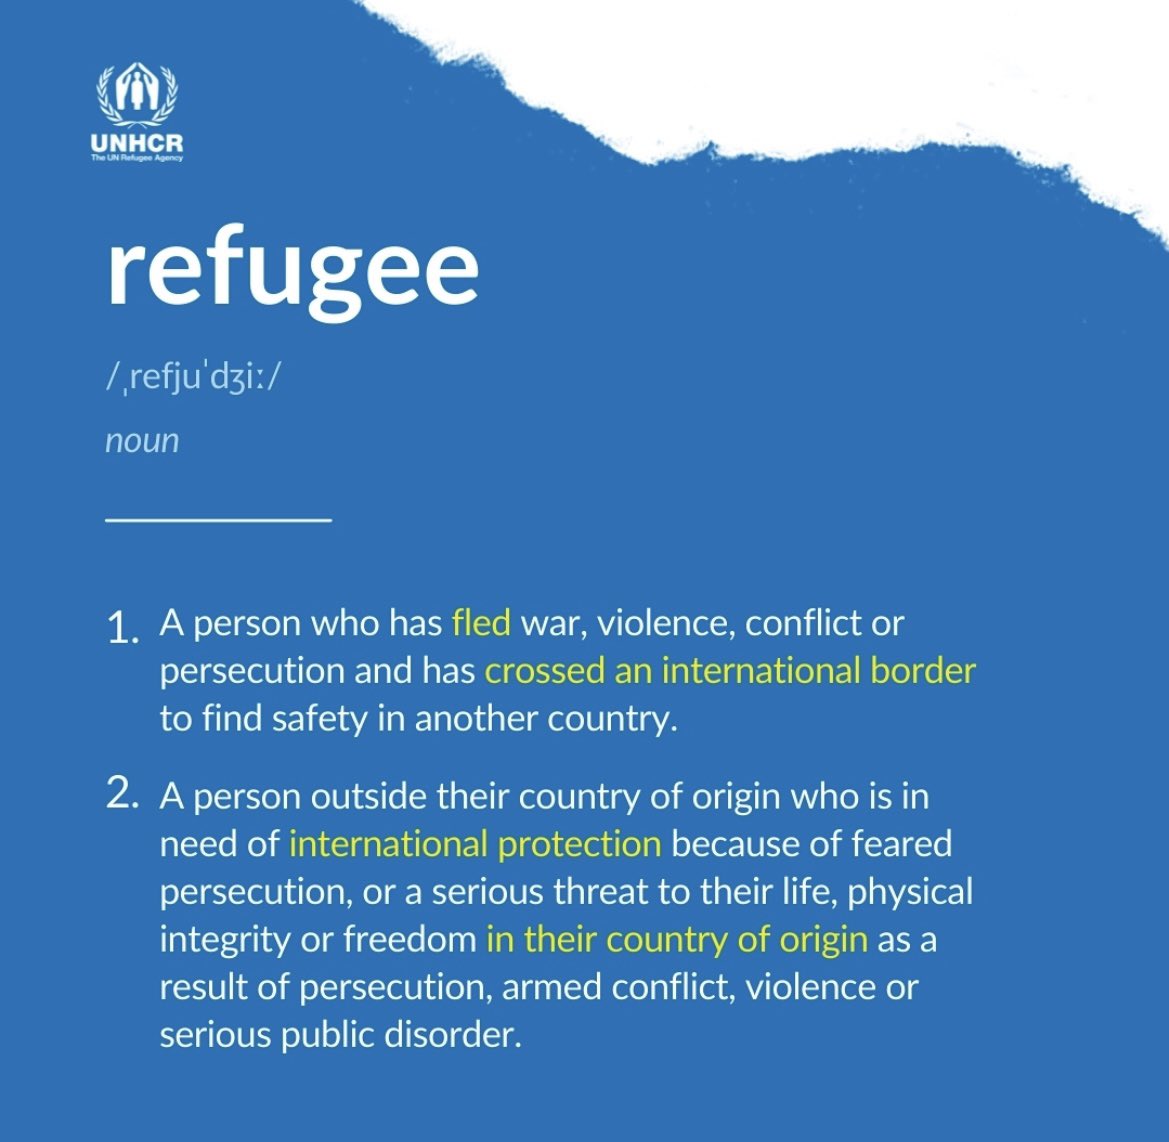 Today we commemorate World Refugee Day under the theme ‘Right to Seek Safety’. It’s a day to honour the courage, strength and contributions of the millions of refugees around the world.